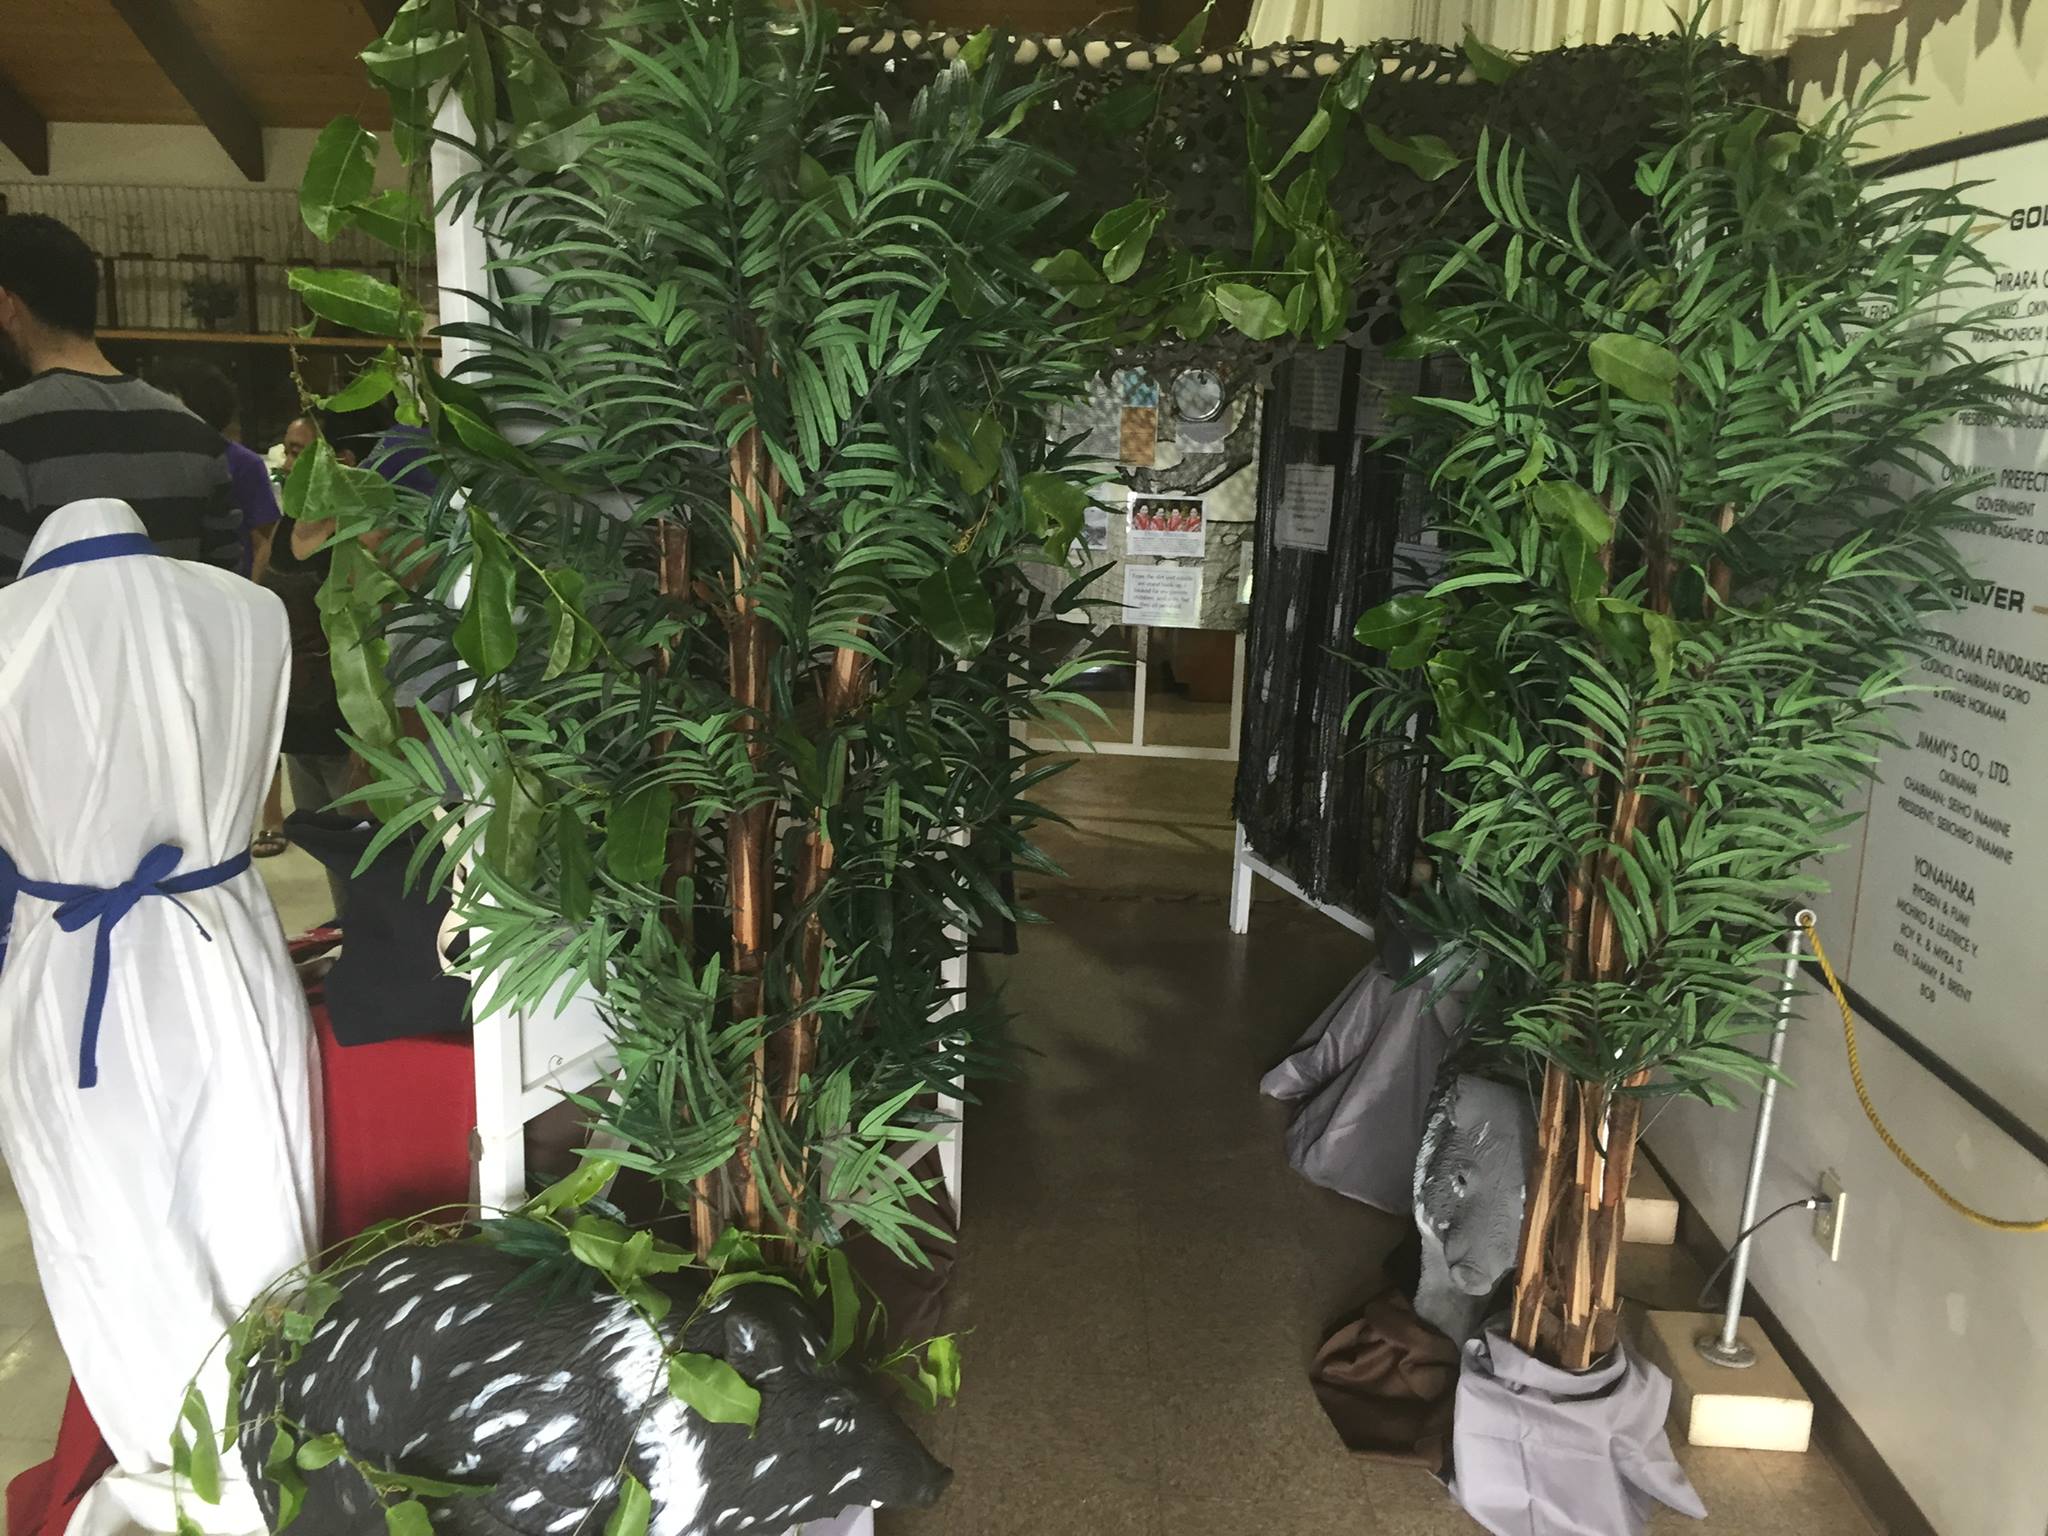 Mock cave and display by Maui groups